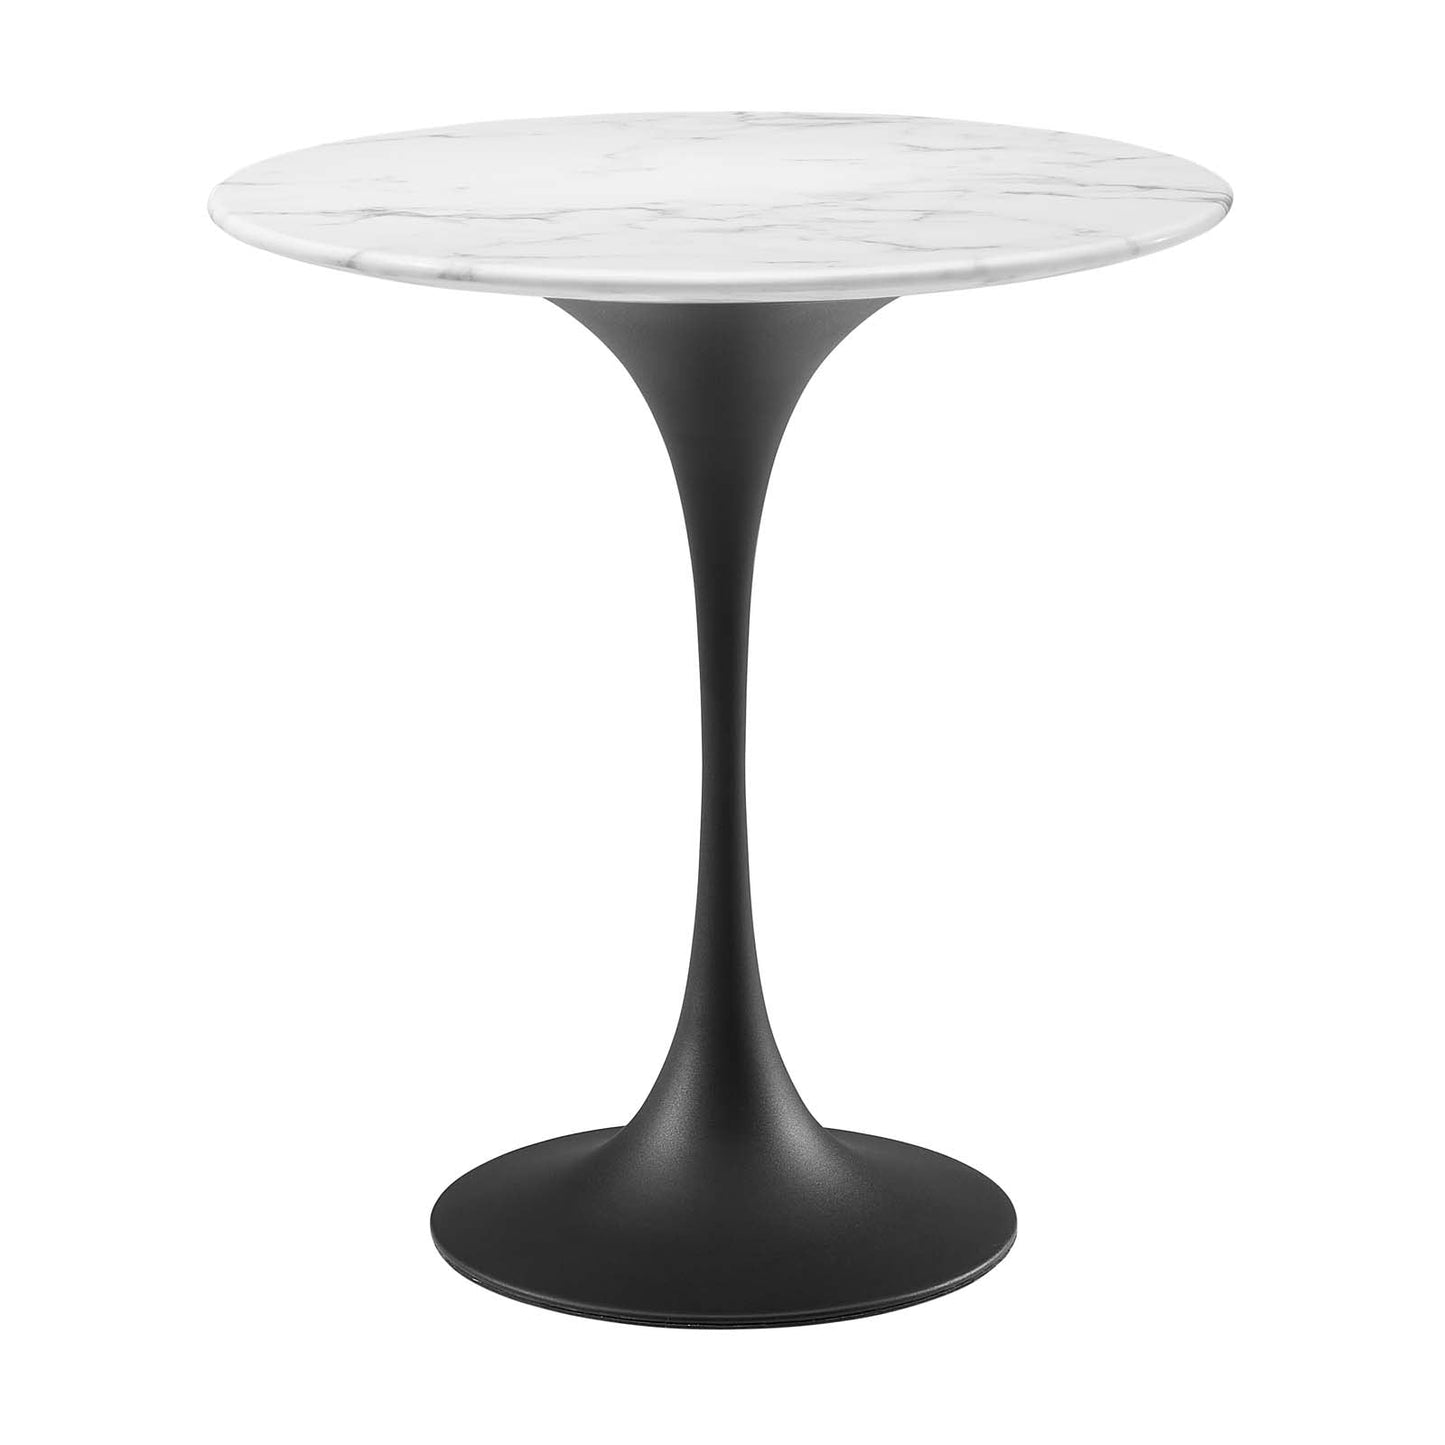 Tulip Style 20" Round Artificial Marble Side Table